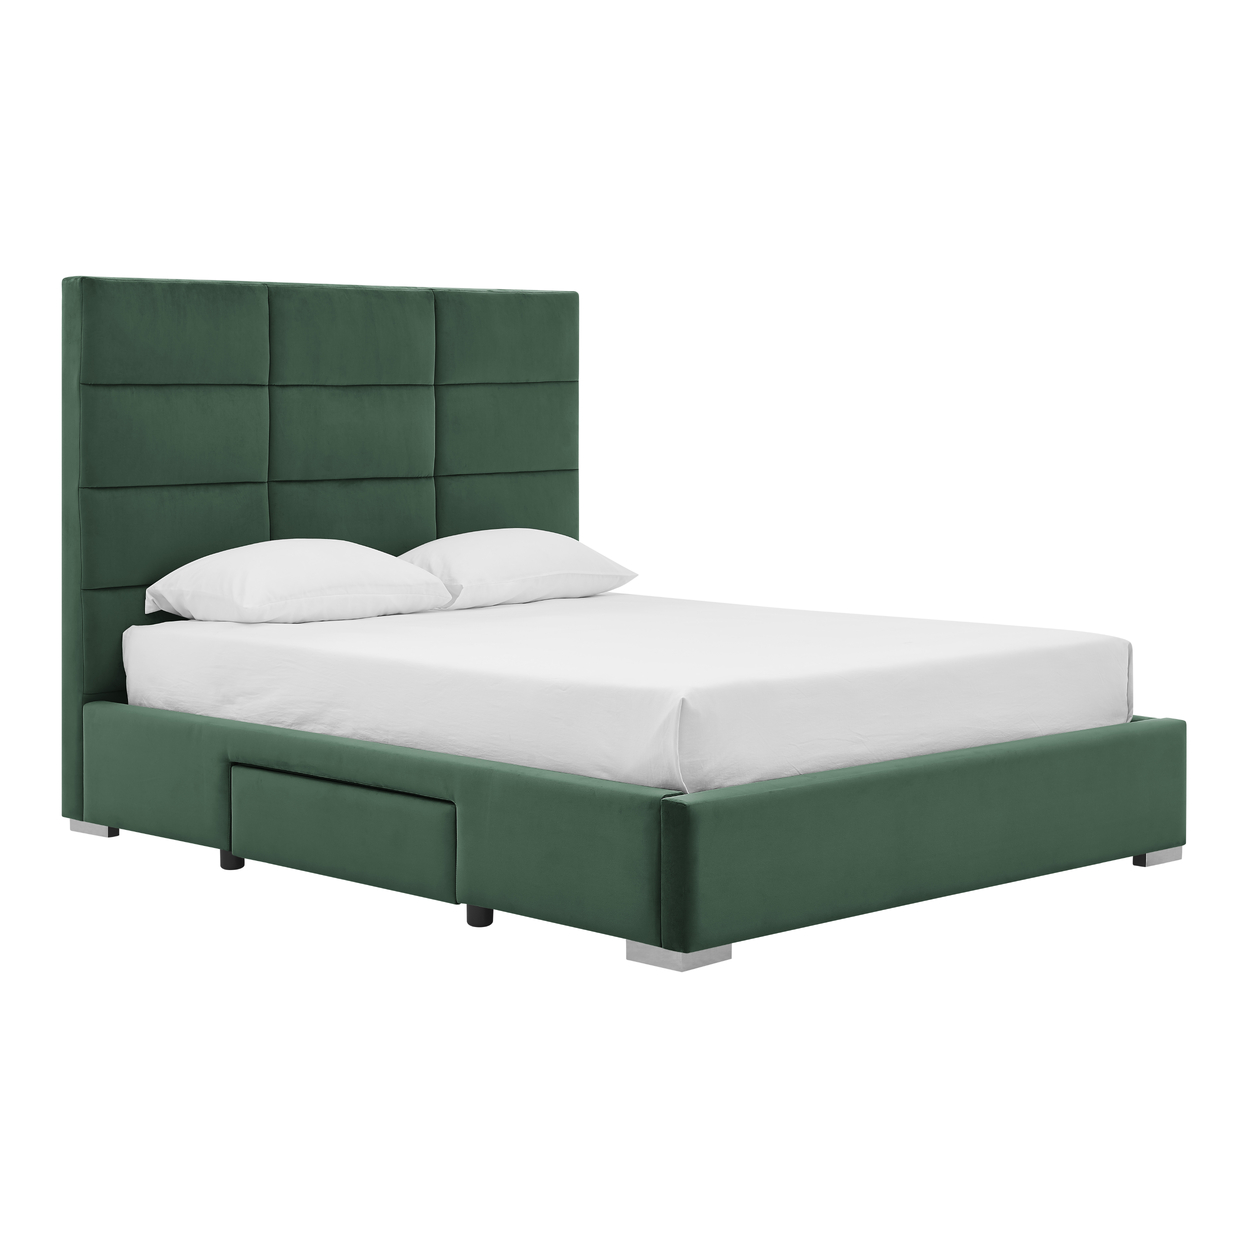 Iconic Home Durazzo Storage Platform Bed Frame With Headboard Velvet Upholstered Box Quilted, Modern Contemporary - Dark Green, King